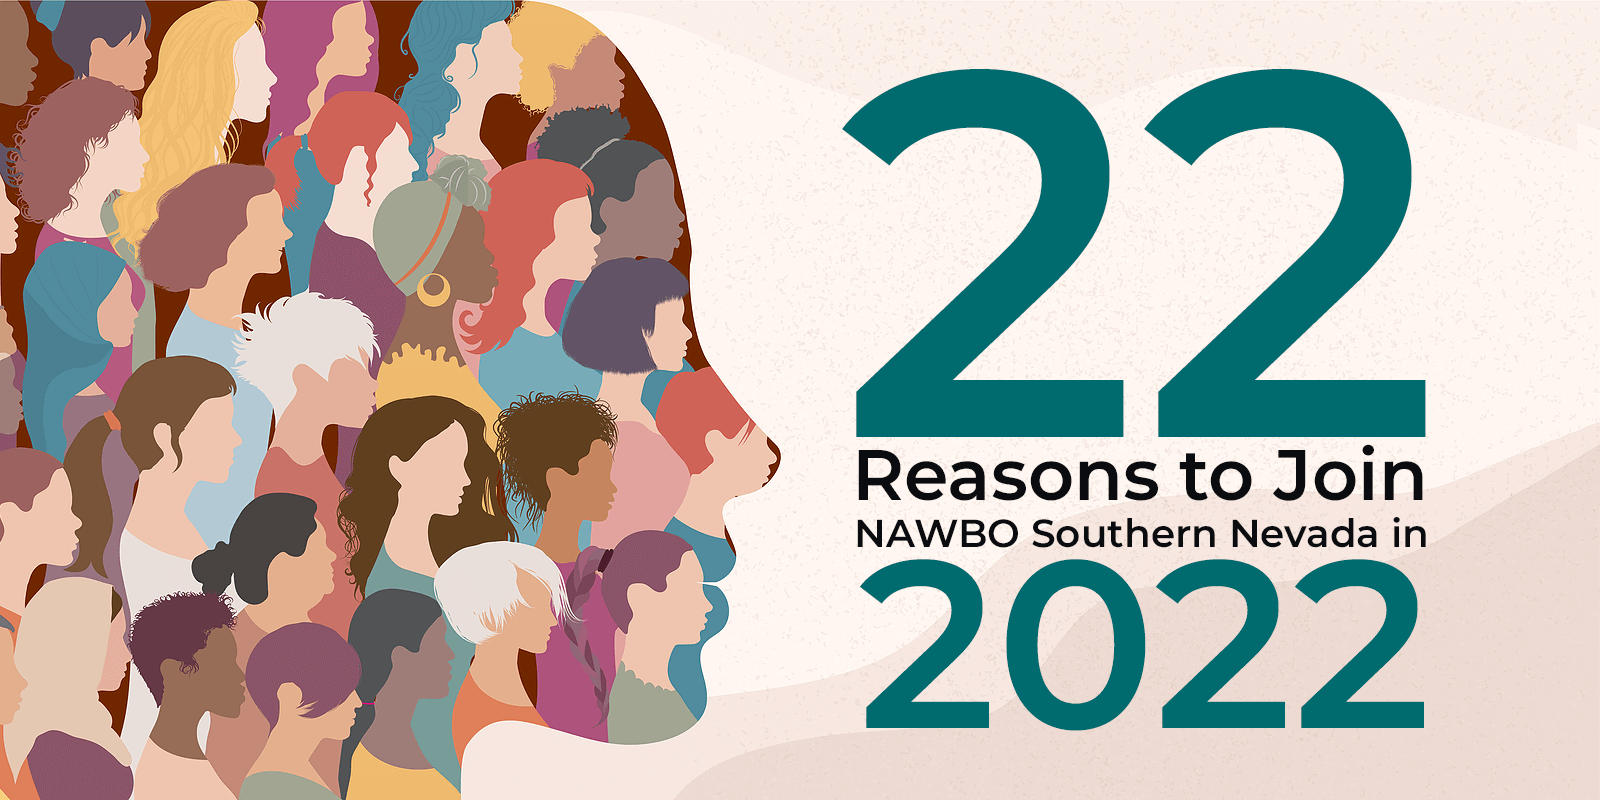 22 Reasons Why Women Business Owners Should Join NAWBO Southern Nevada in 2022